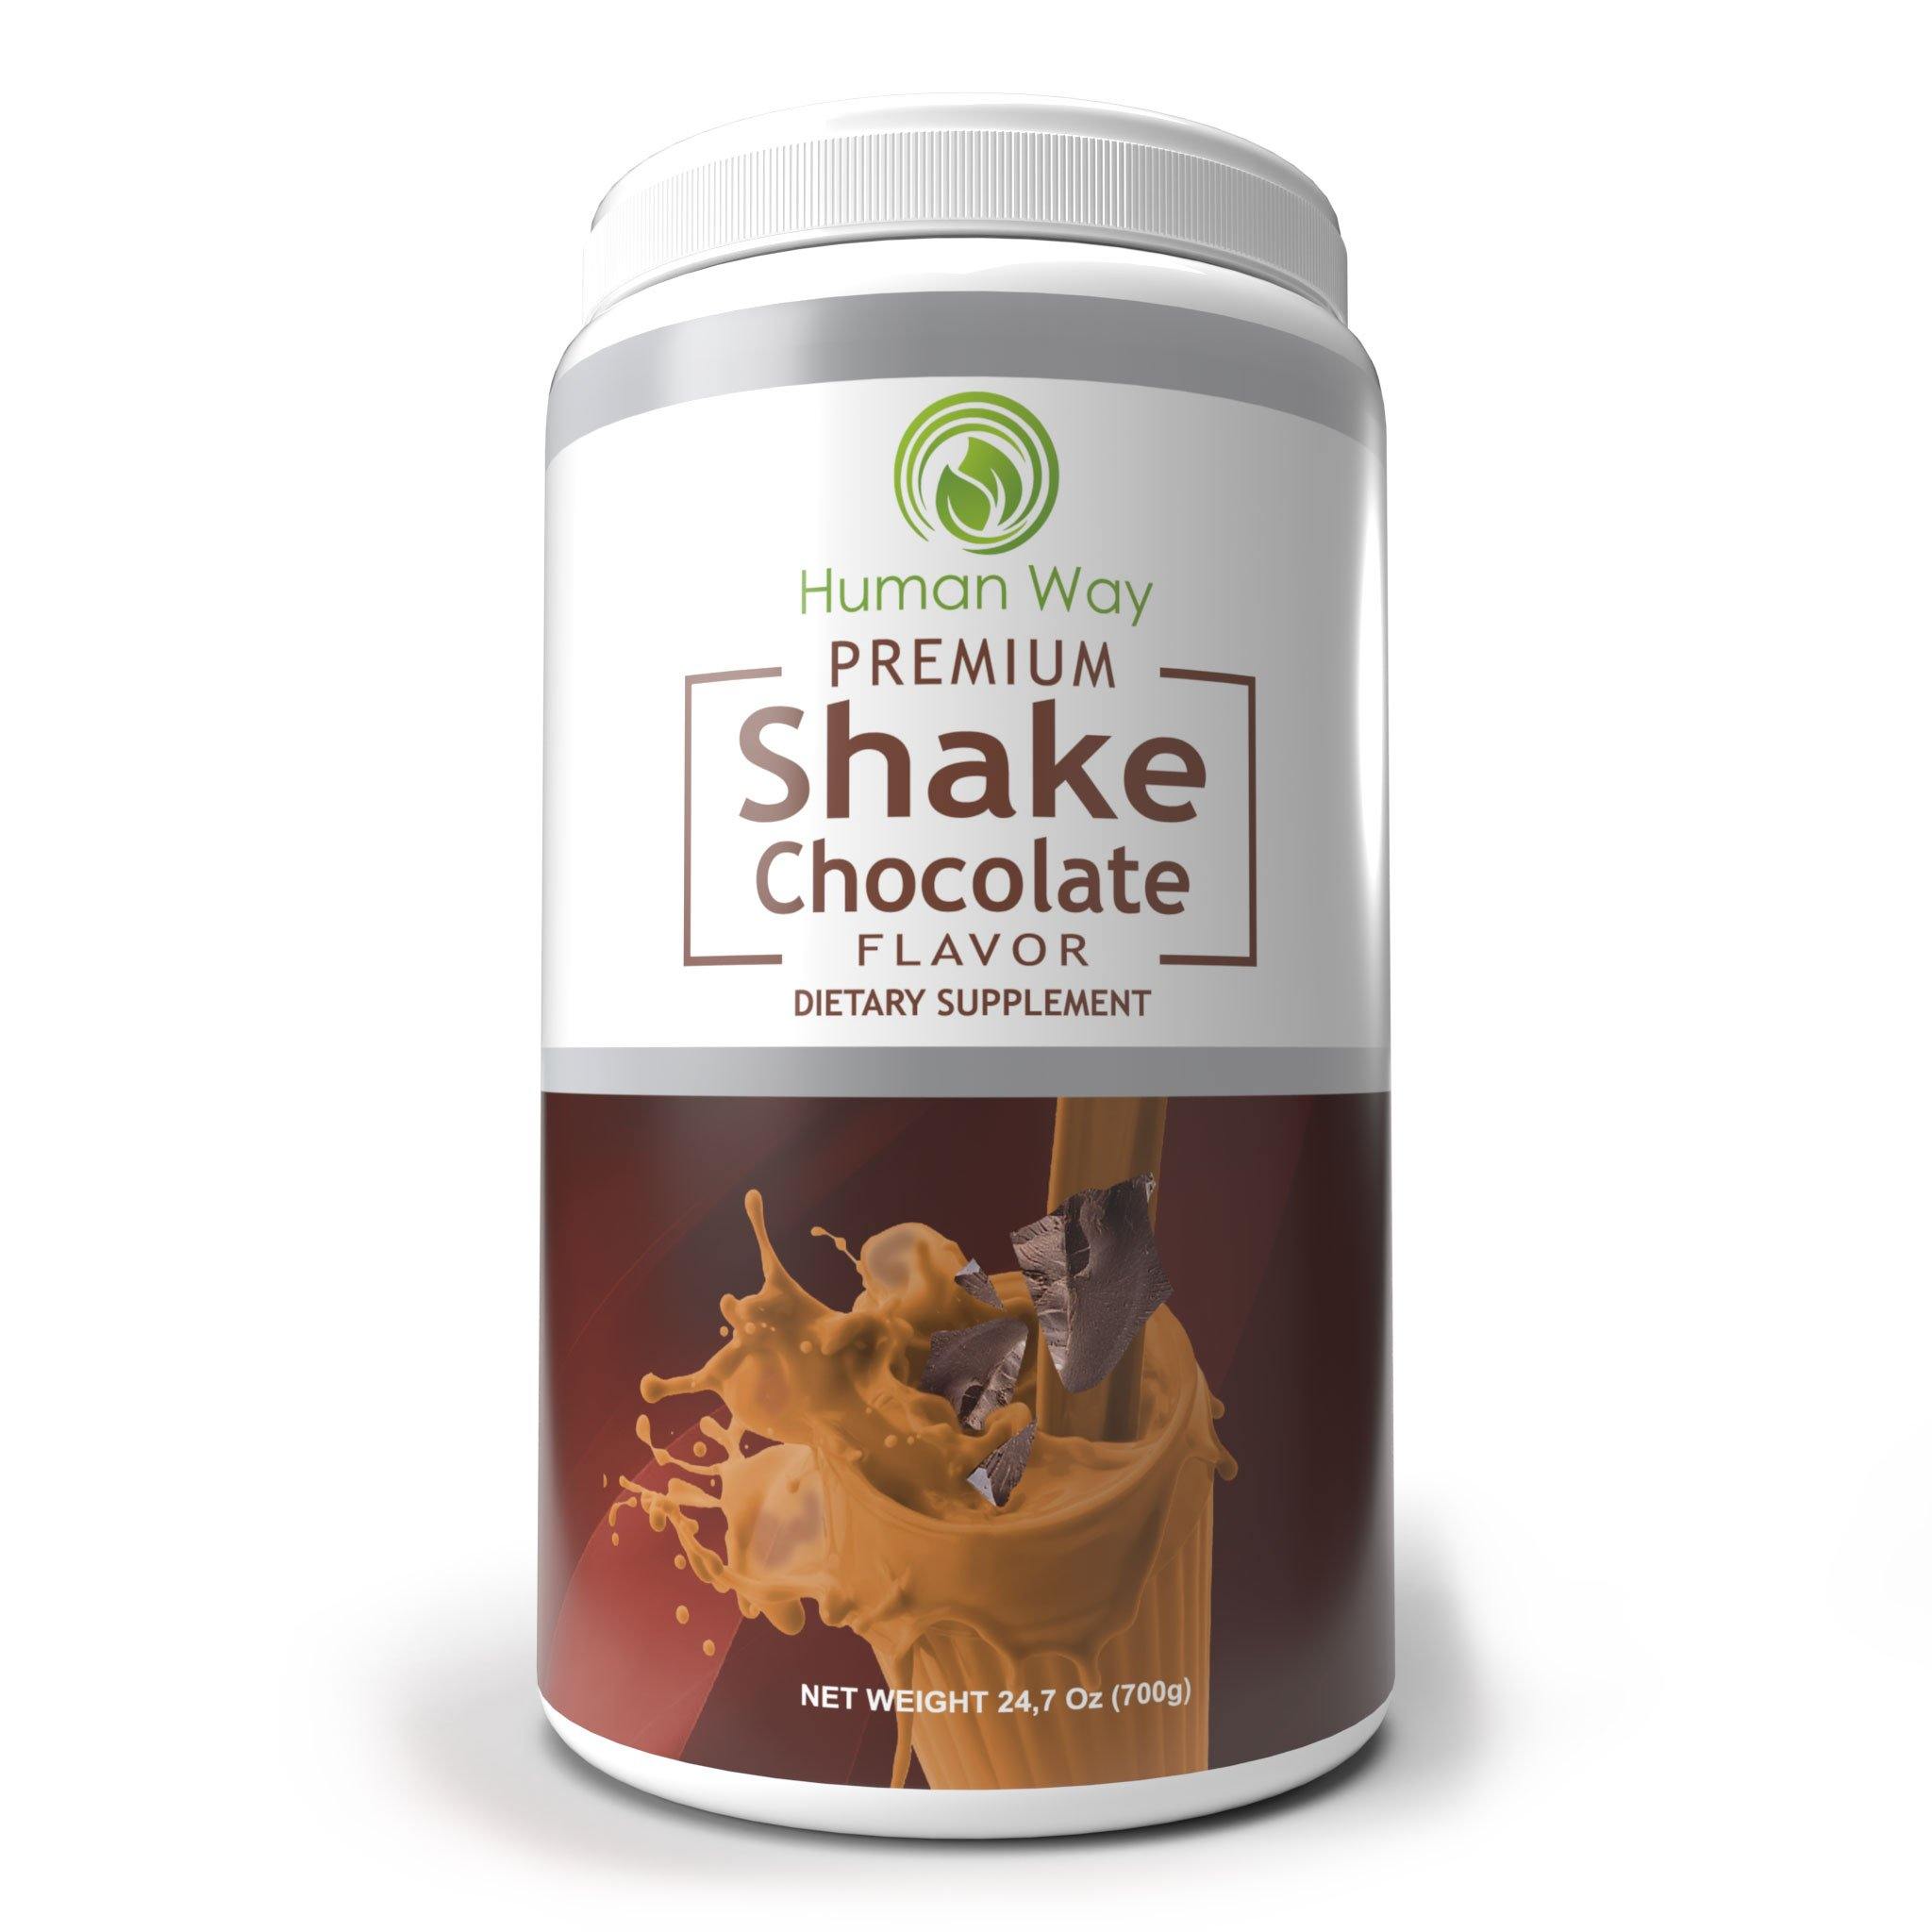 Premium shake is a complete nutritional shake that contains everything your body needs for a nutritious morning shake or meal. 